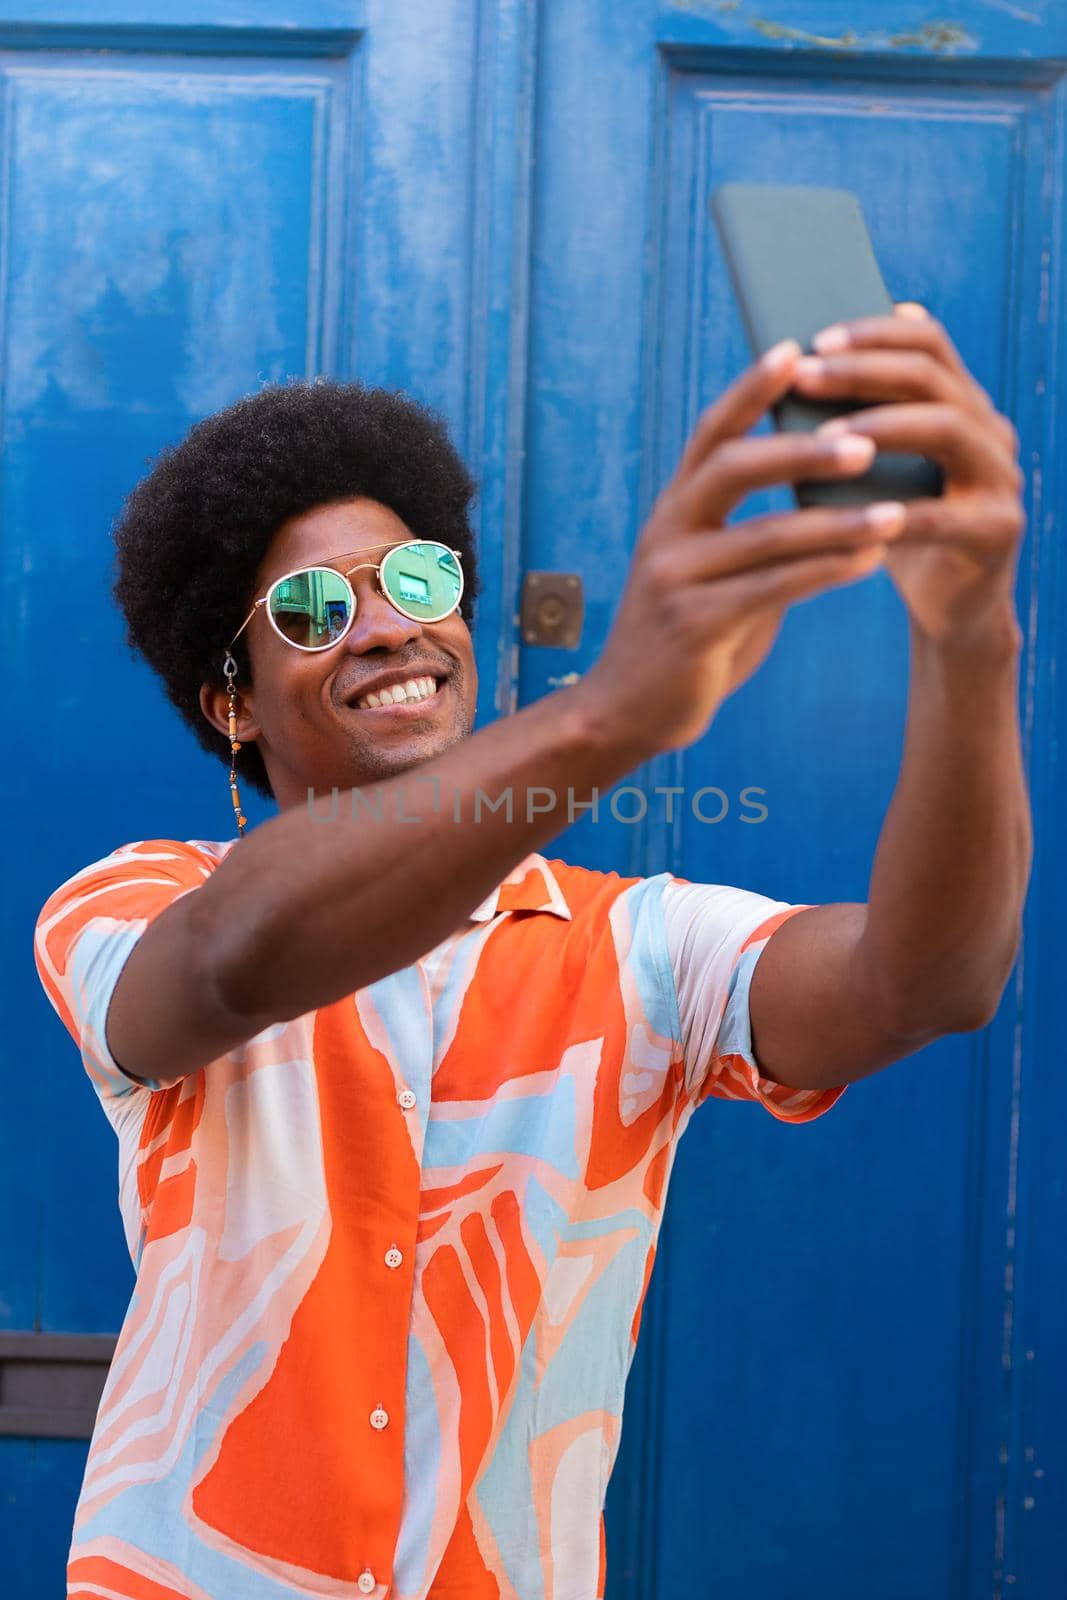 Young happy black man taking selfie with mobile phone outdoors. Vertical image. Lifestyle concept.